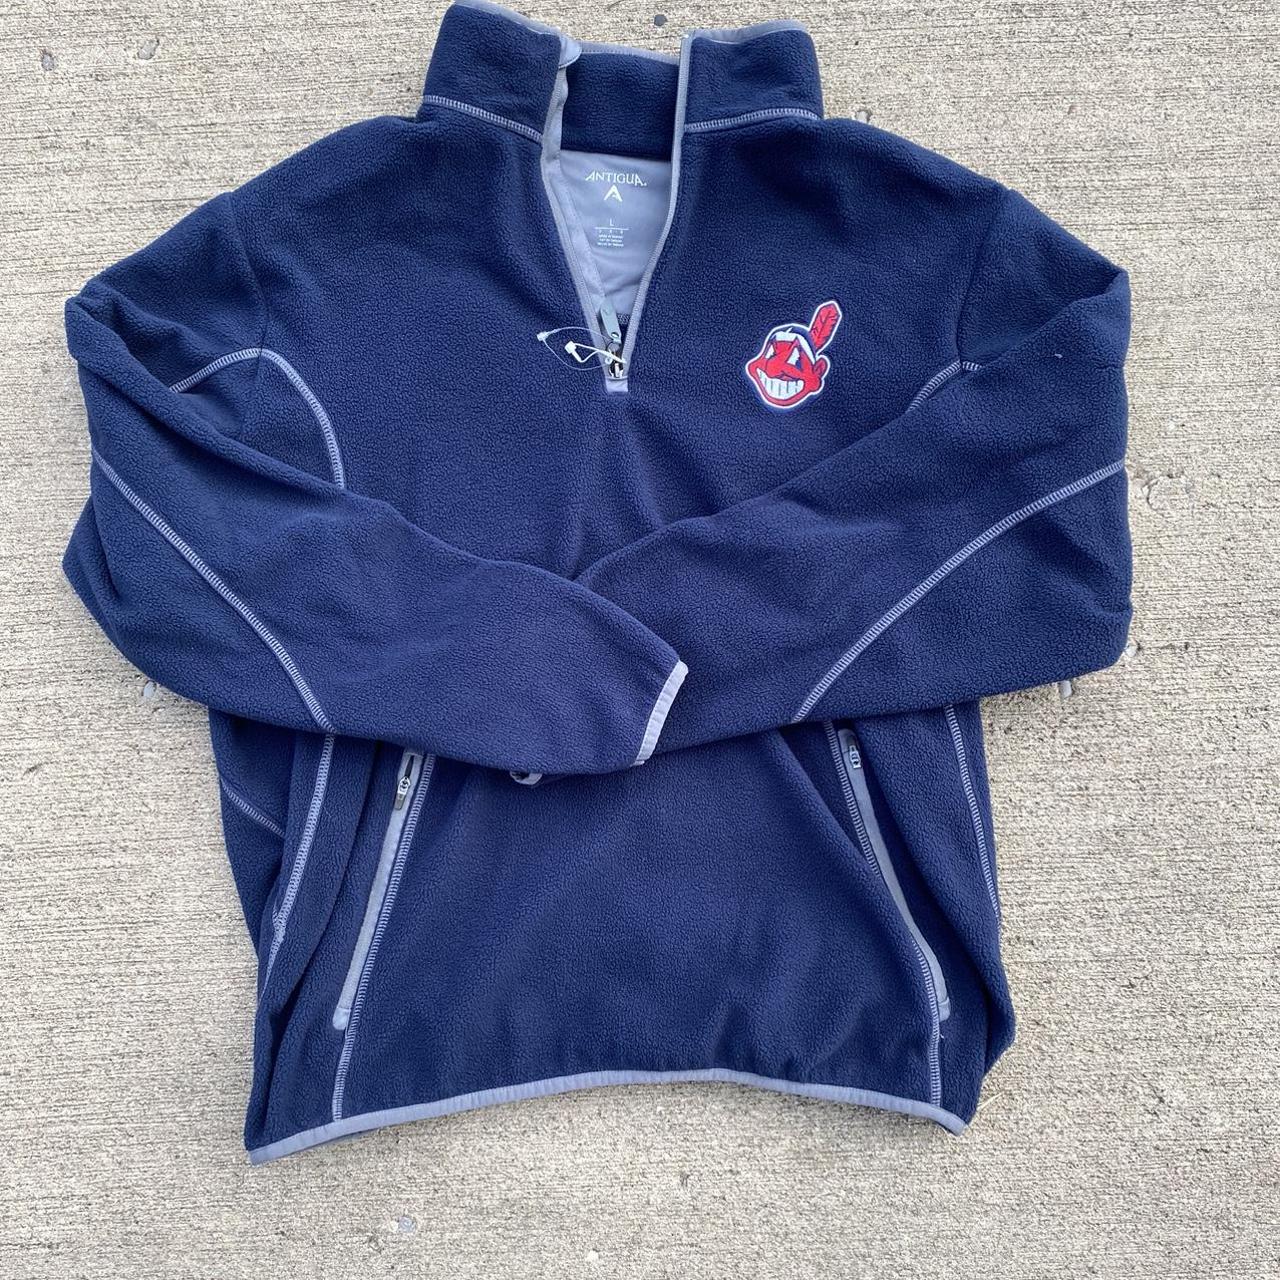 Antigua Apparel Men's Navy and Red Jumper